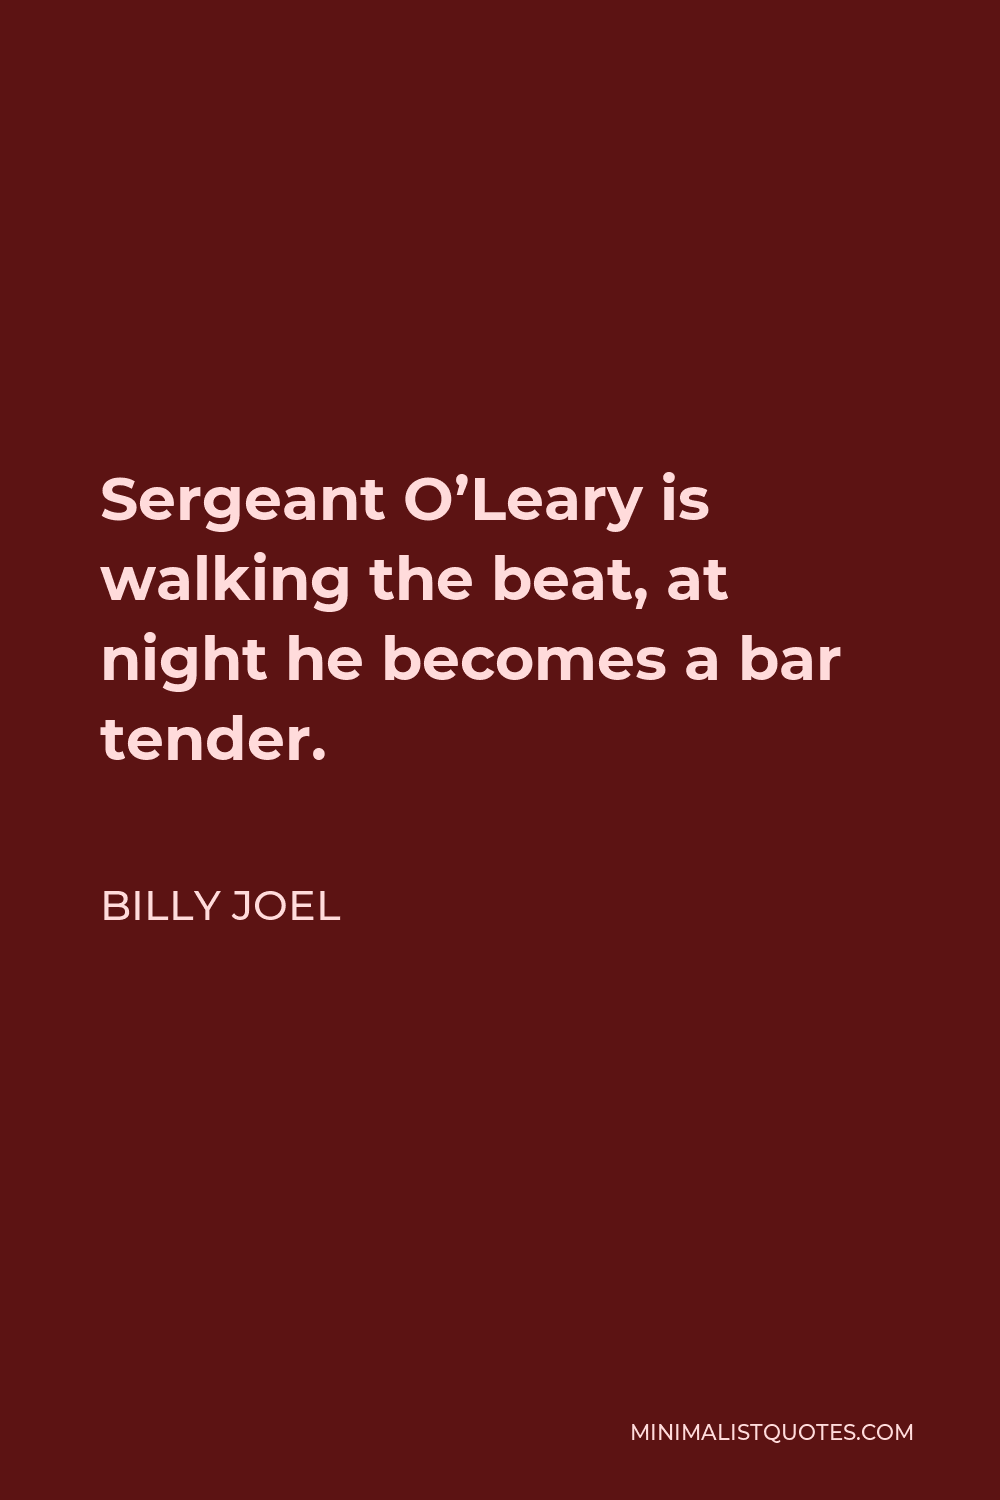 Billy Joel Quote - Sergeant O’Leary is walking the beat, at night he becomes a bar tender.